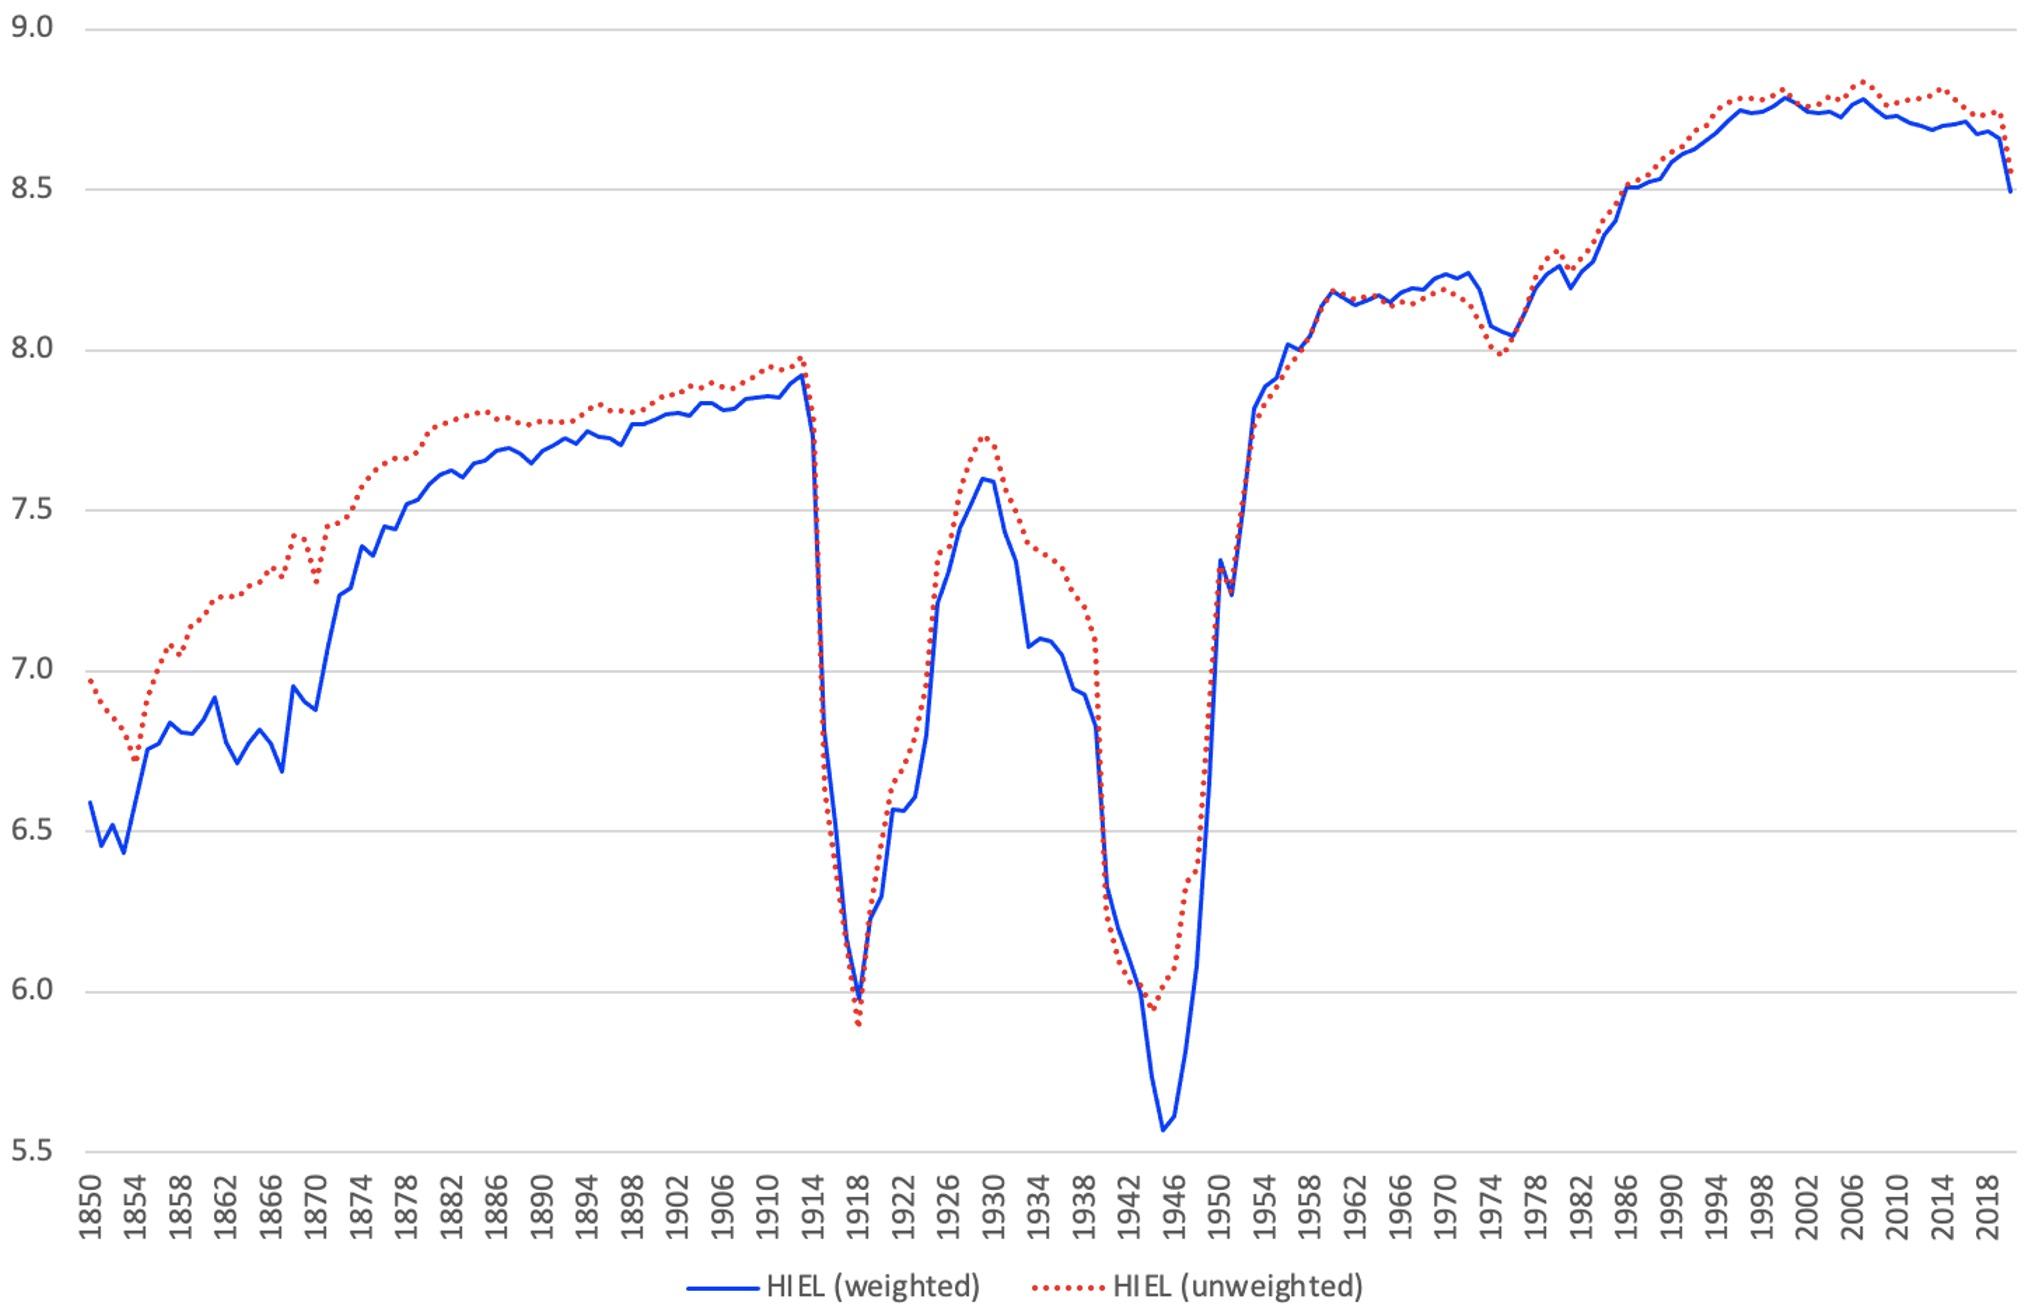 Figure 1 Historical Index of Economic Liberty: Unweighted and weighted average